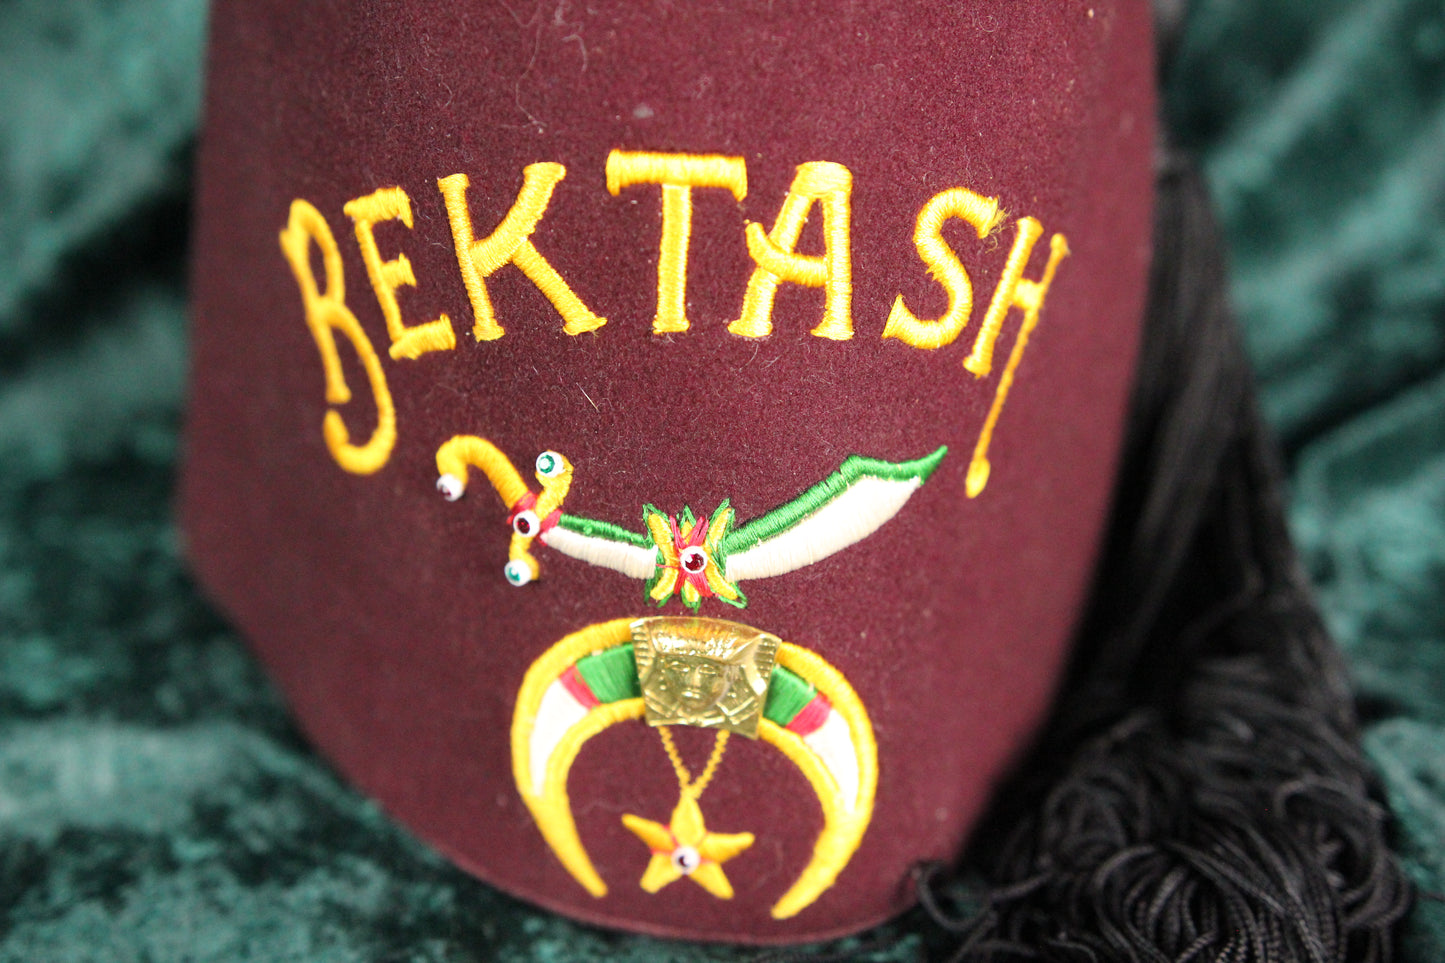 Masonic Shriners Ceremonial Fez Hat with Crest